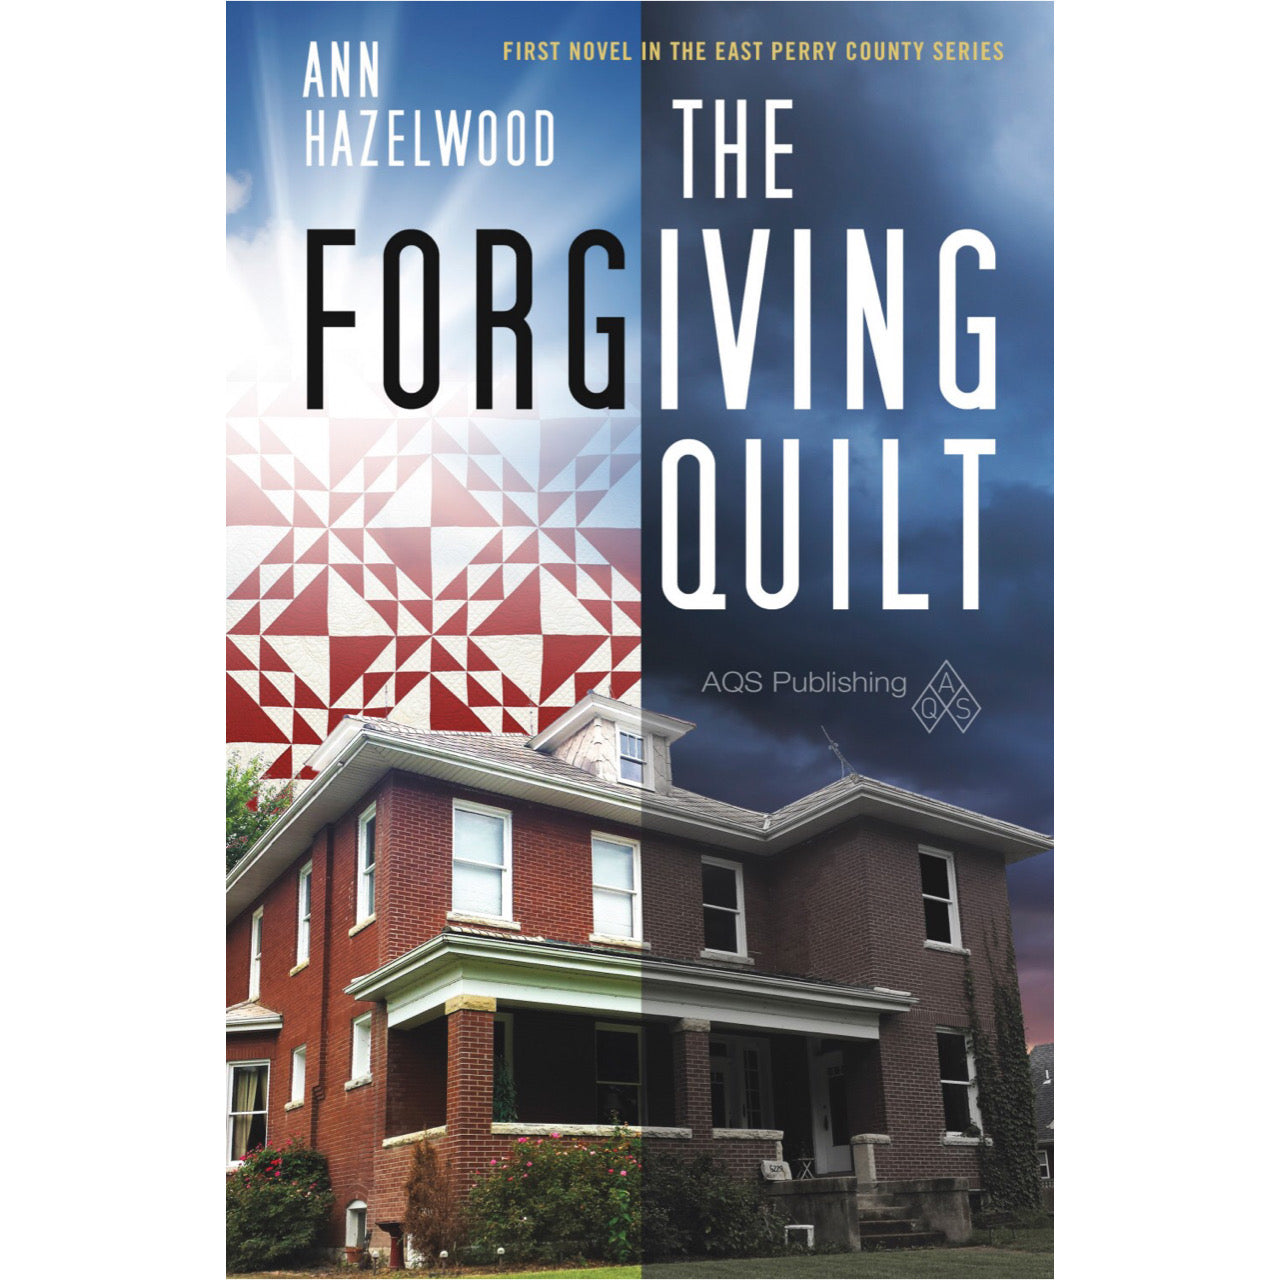 East Perry Country Series - The Forgiving Quilt - Book 1 - Ann Hazelwood